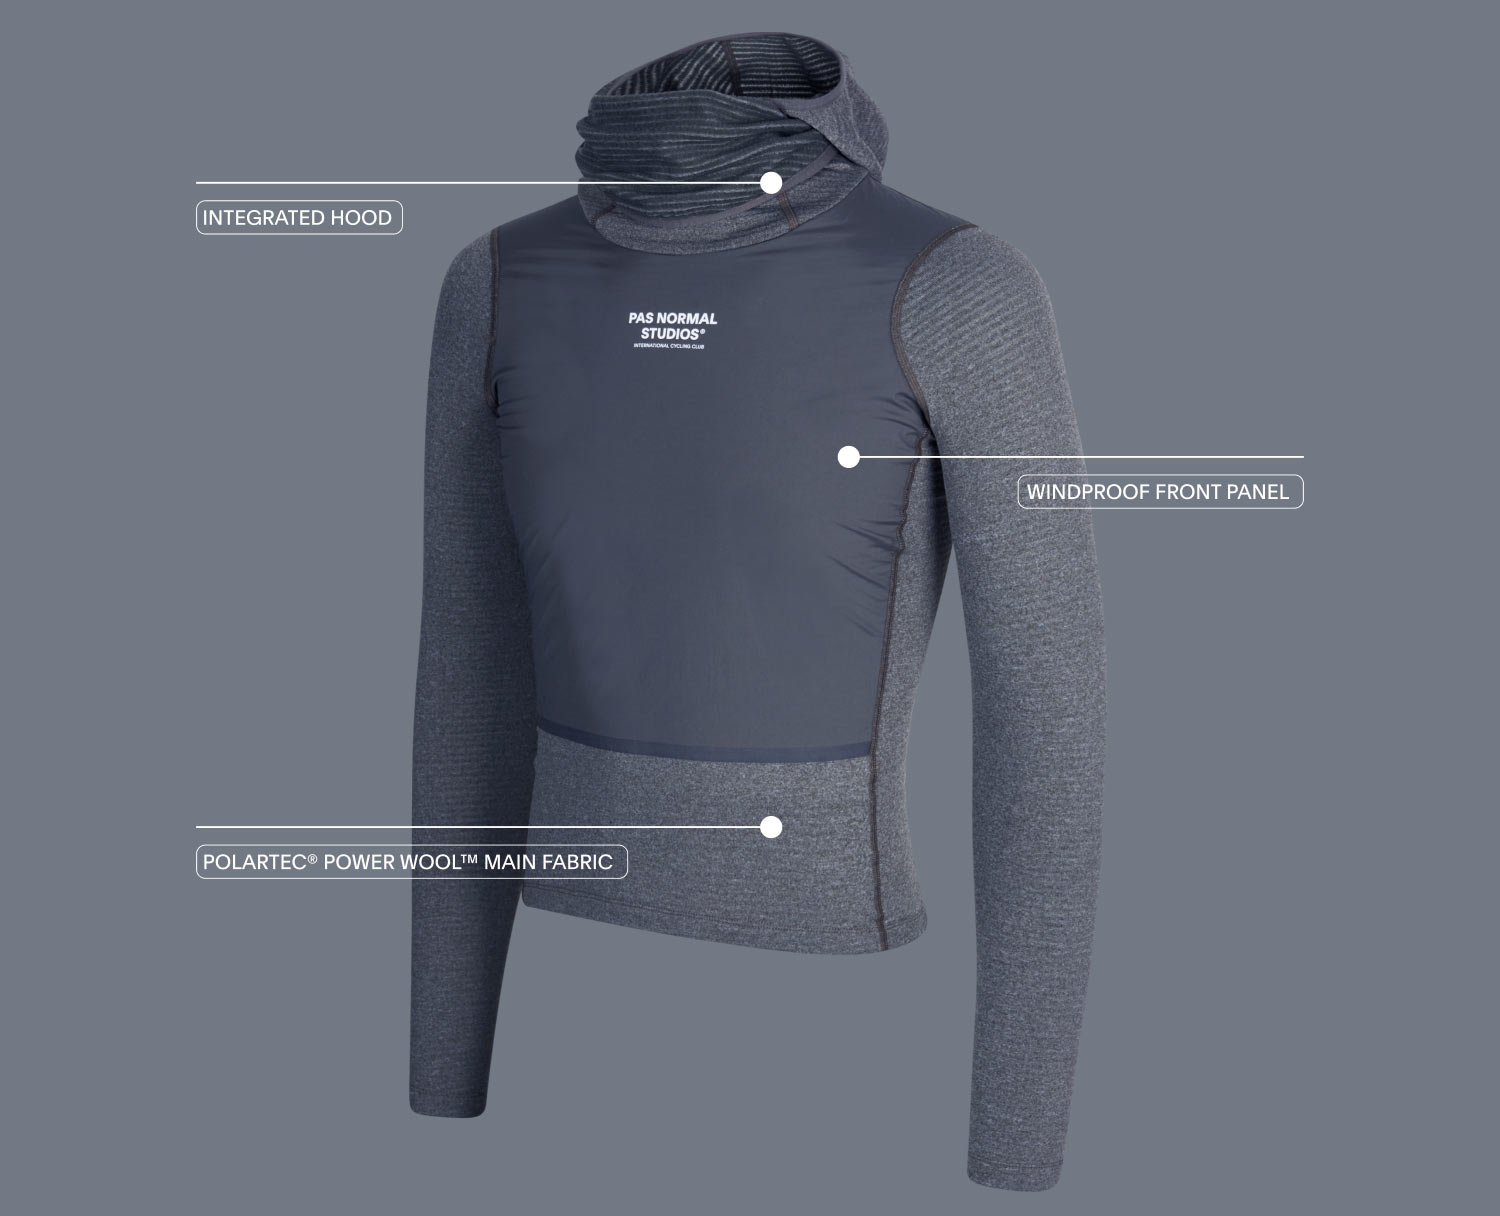 Pas Normal Thermal Long Sleeve Windproof Base Layer, tech details Polartec Power Wool merino